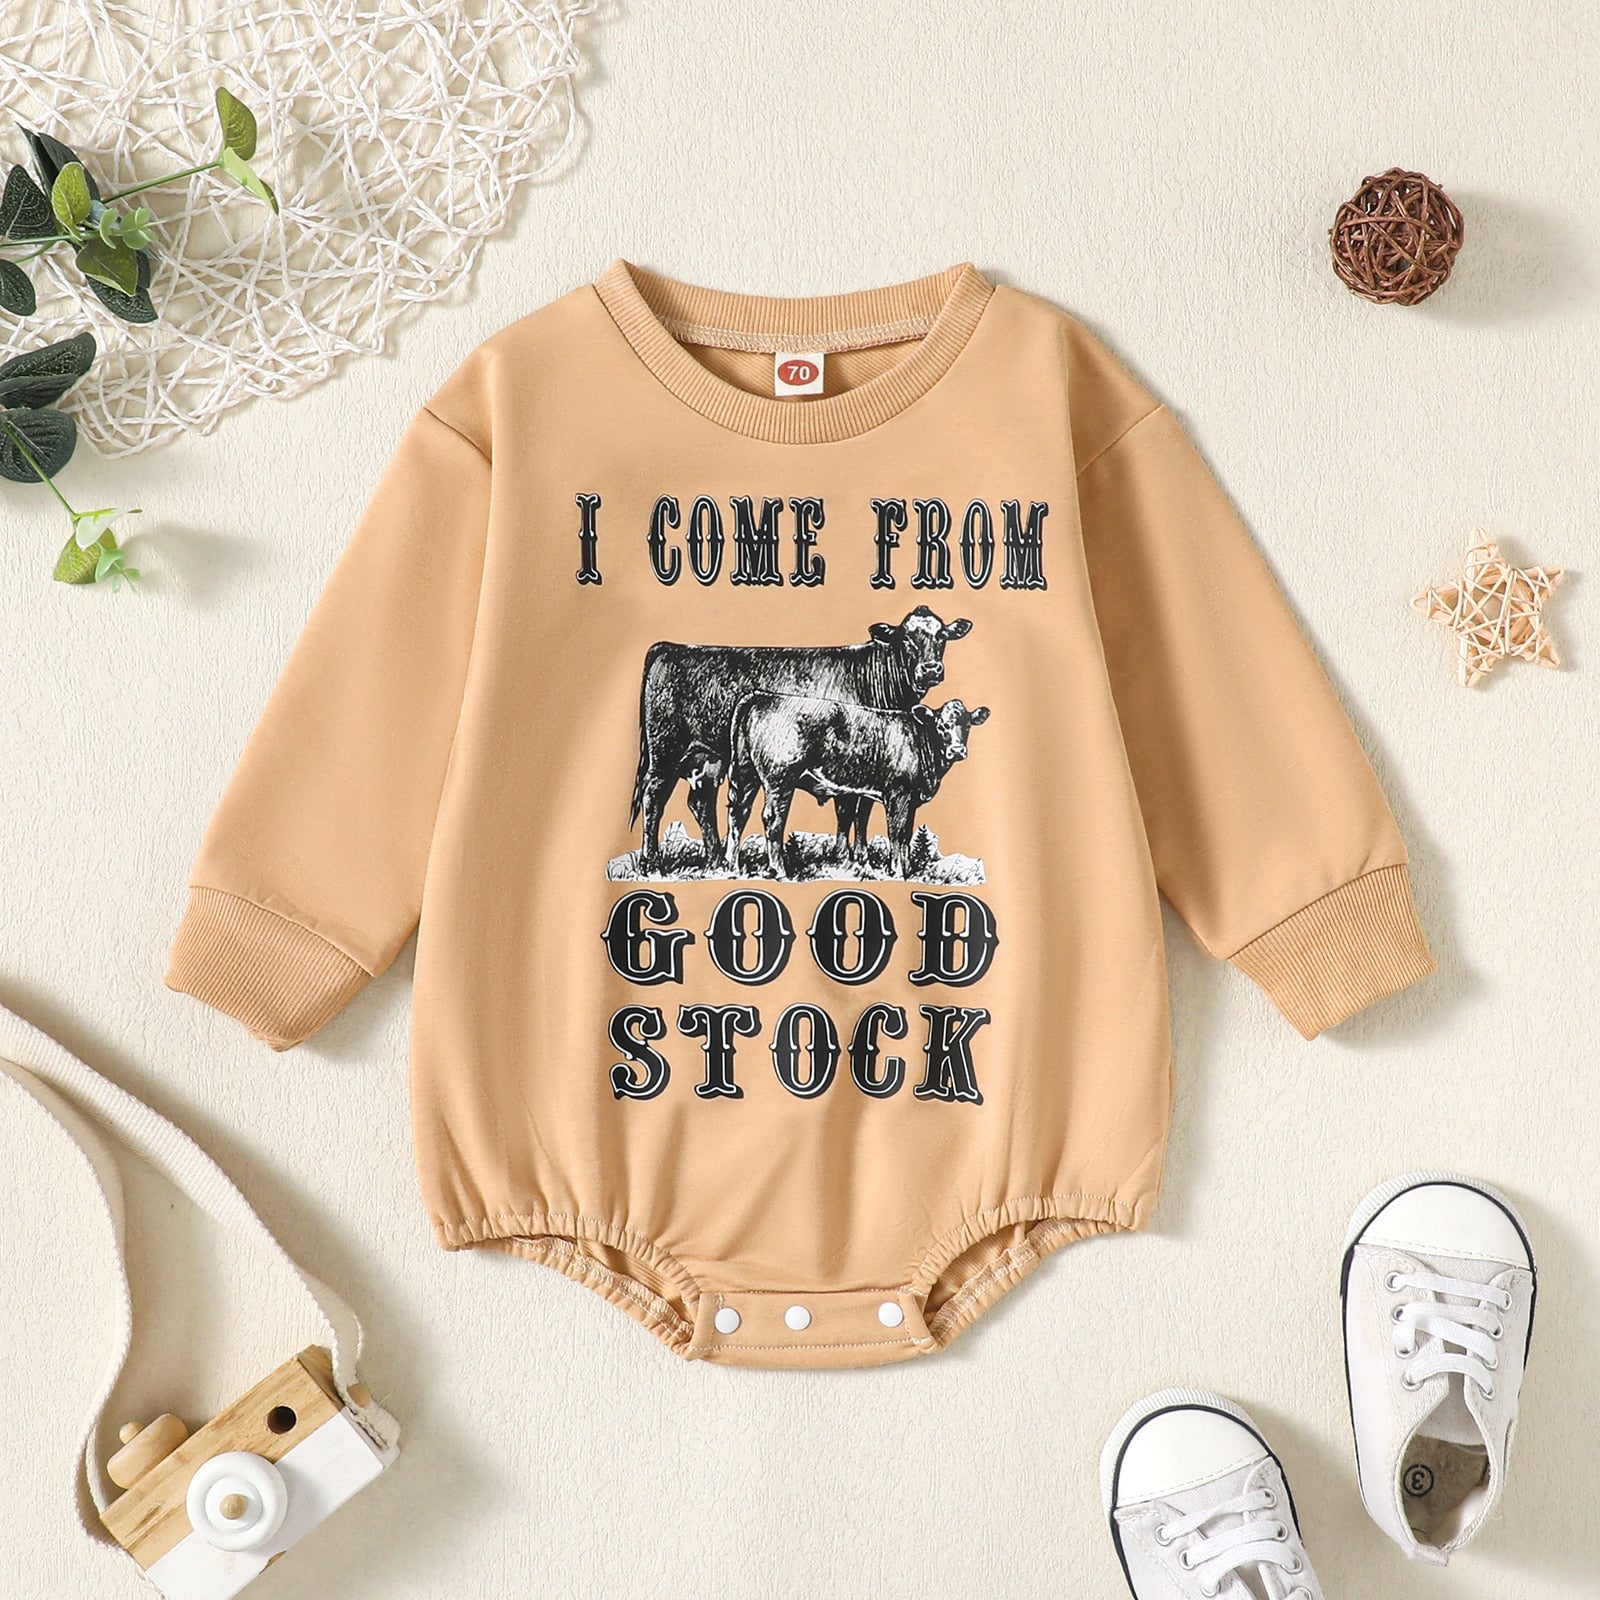 Hippie Baby Clothes Cow Shirt Baby Clothes Cute Baby Girl Clothes Cow Shirt  for Kids Kids Clothes Cute Baby Boy Clothes 